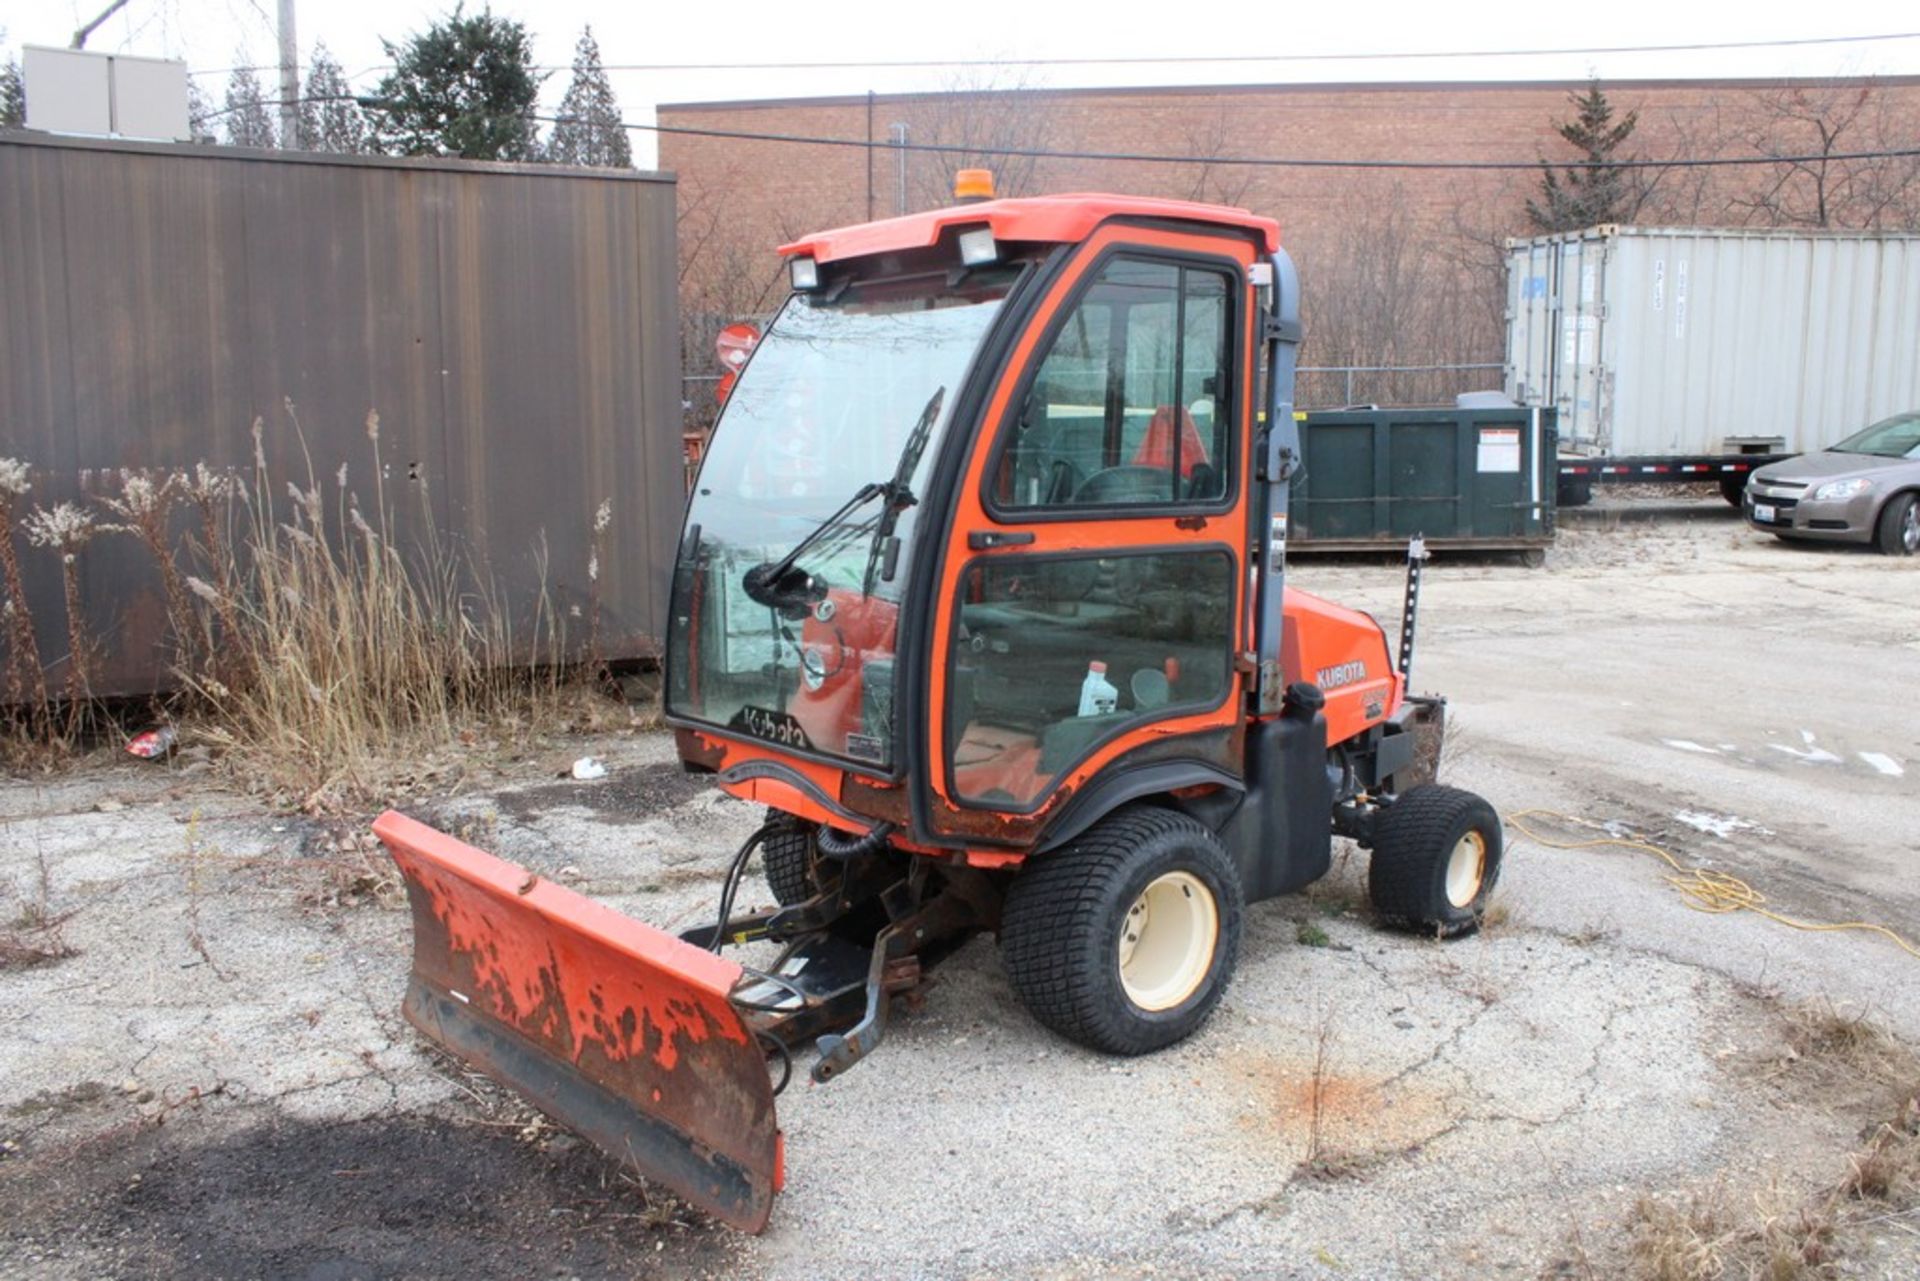 KOBOTA MODEL F2880, 2WD, 28HP, S/N 11032, WITH SNOW PLOW ATTACHMENT - Image 2 of 13